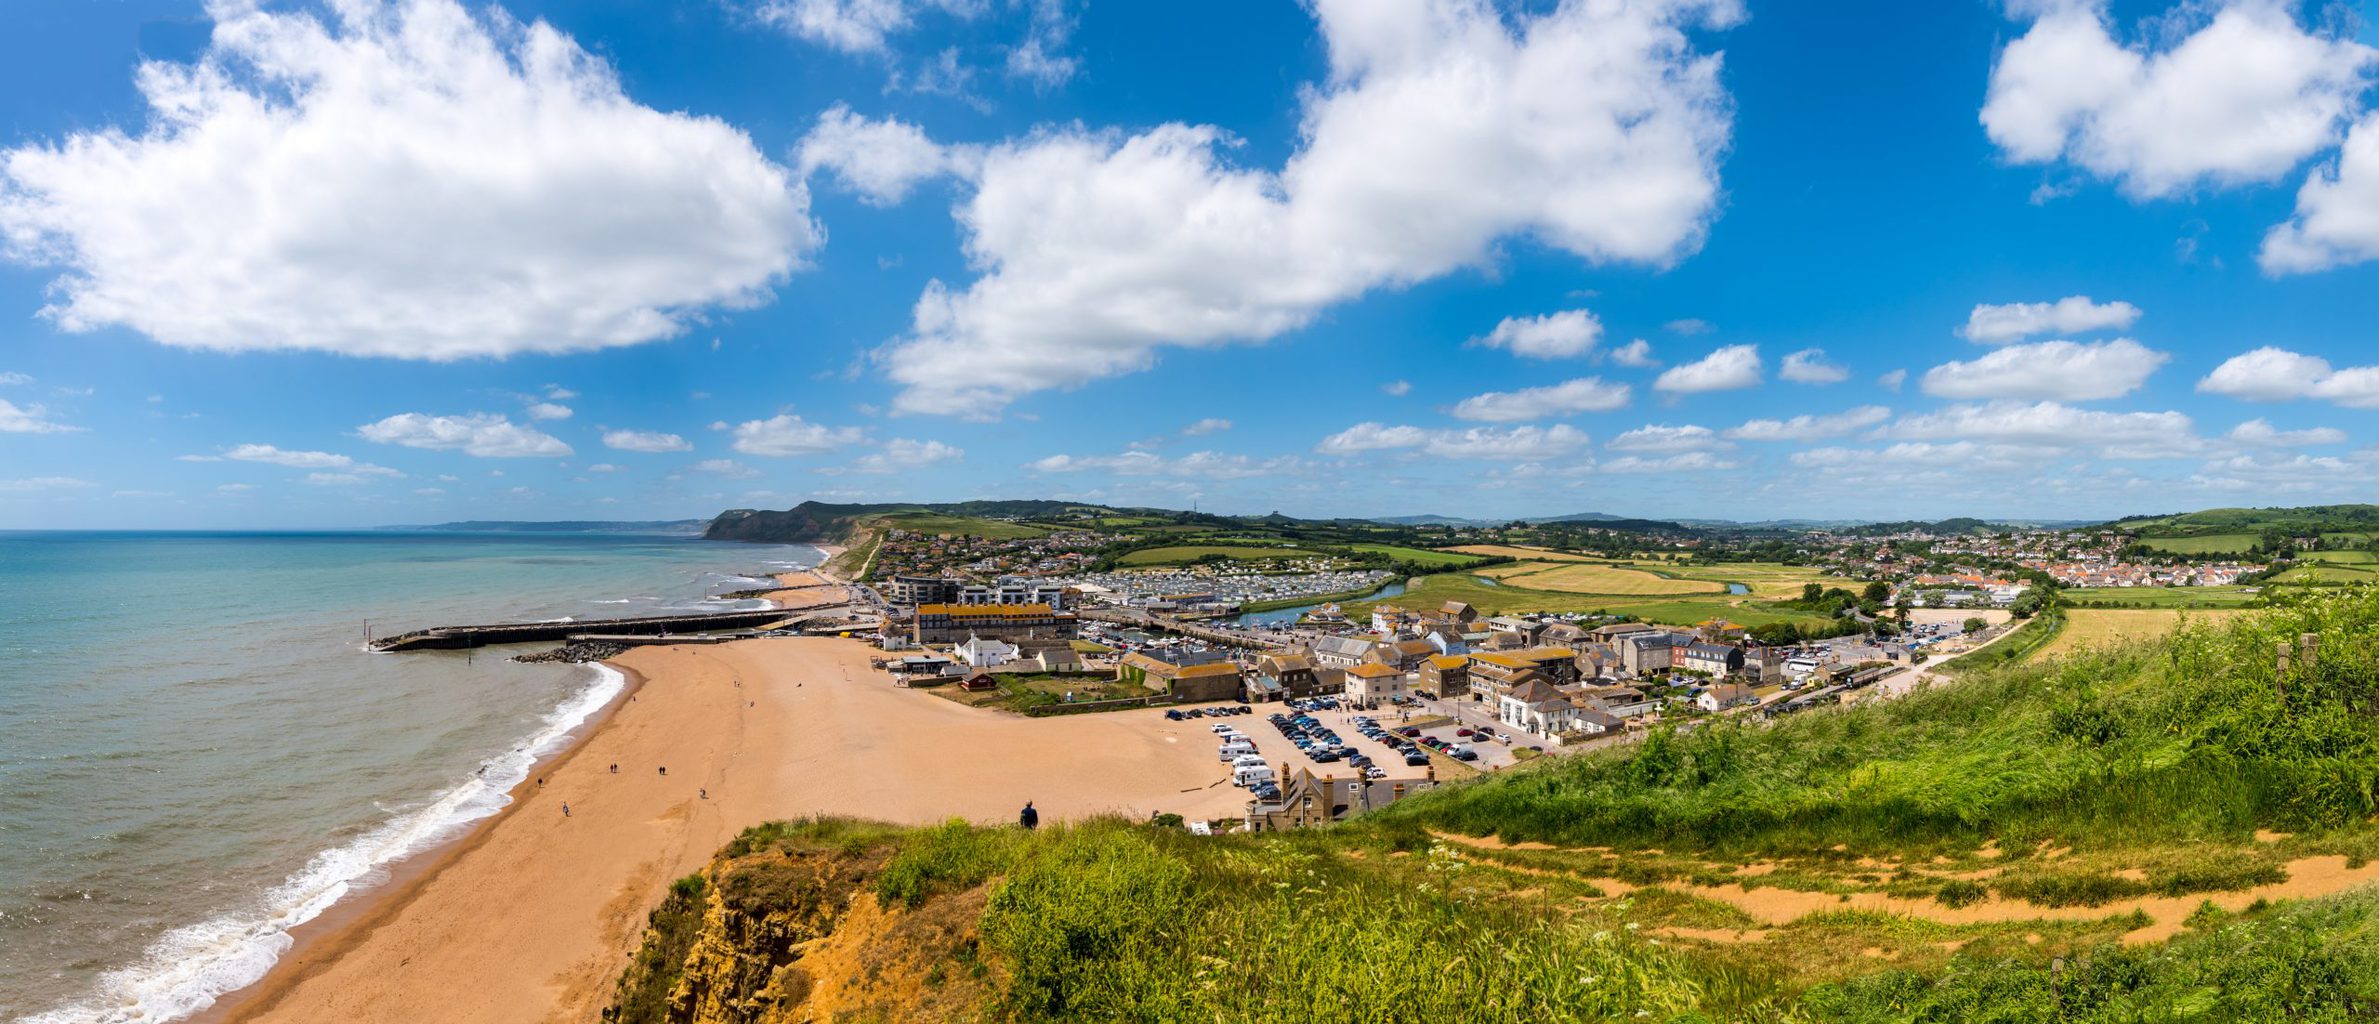 Things to do in Bridport and West Bay